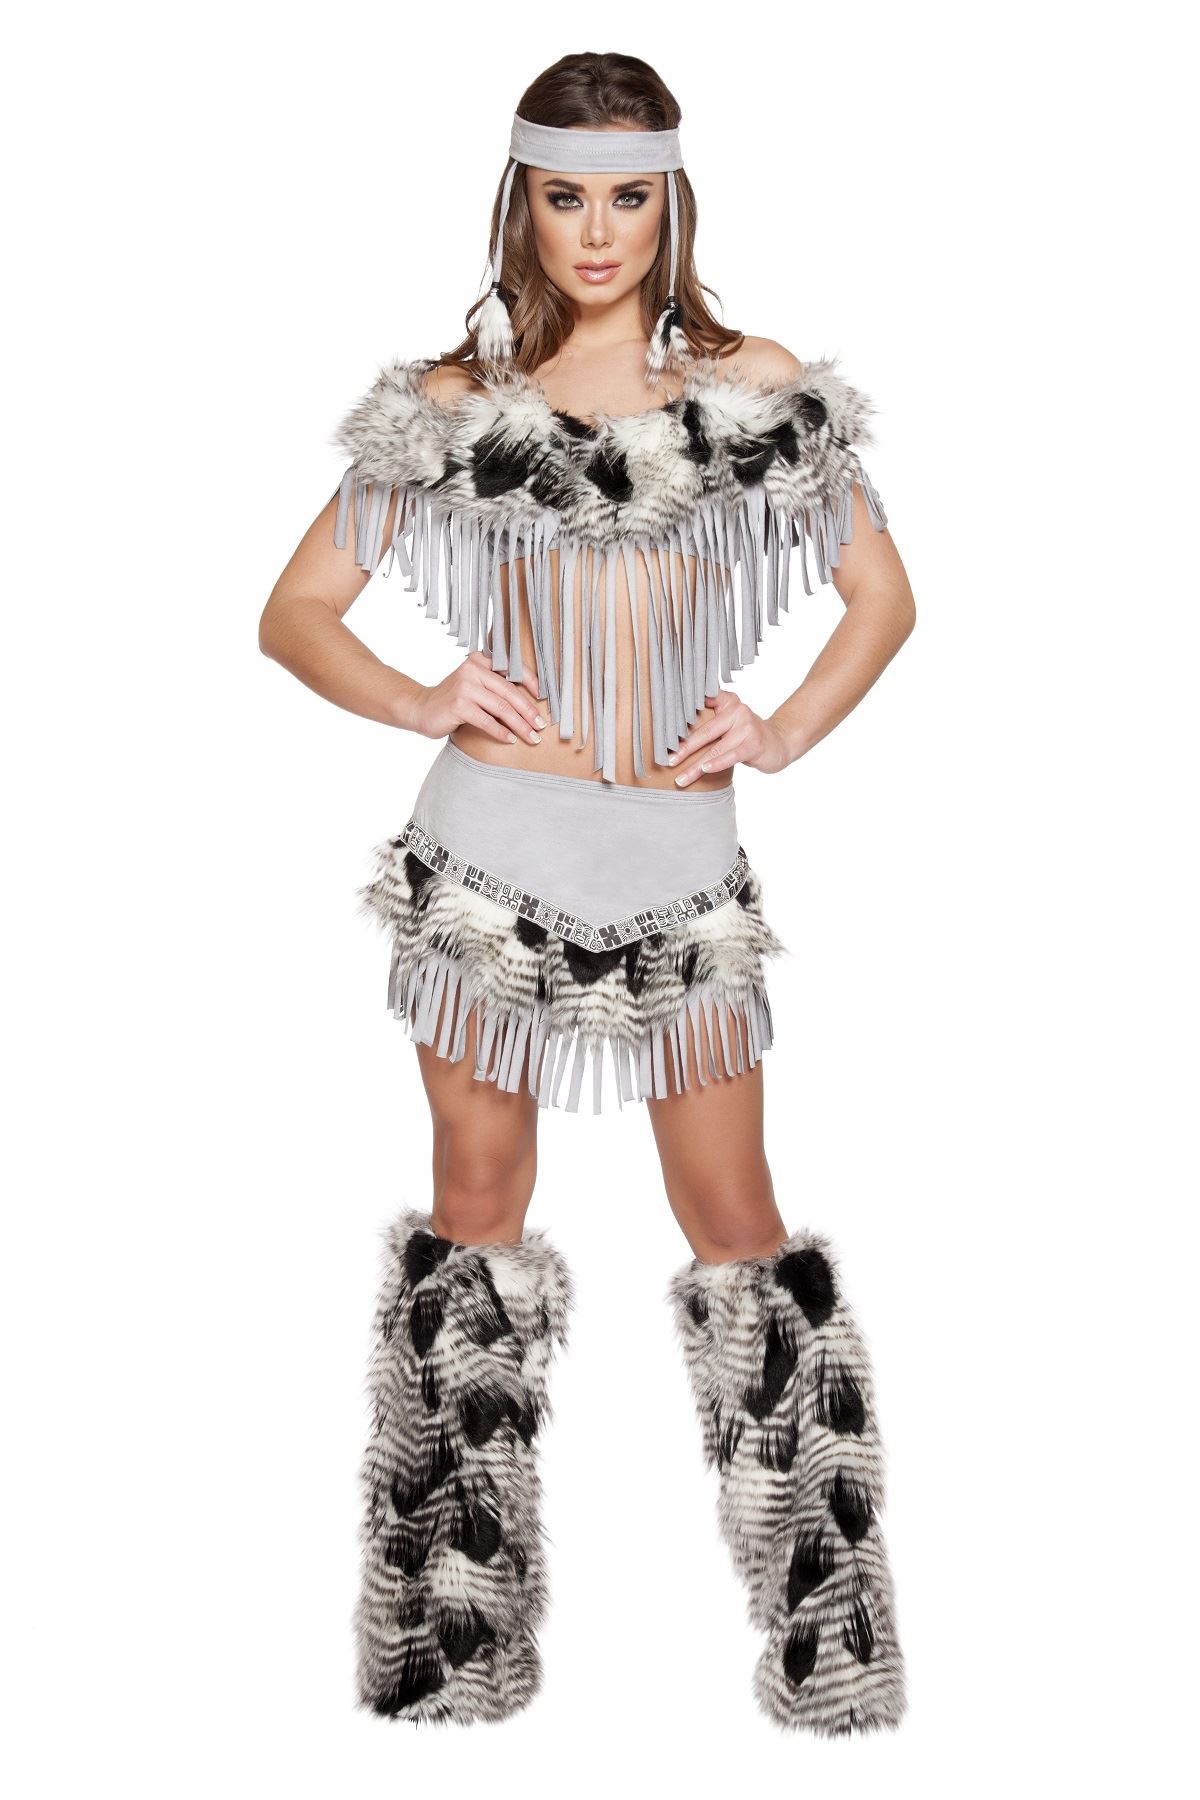 Adult Native American Indian Maiden Woman Costume 8599 The 